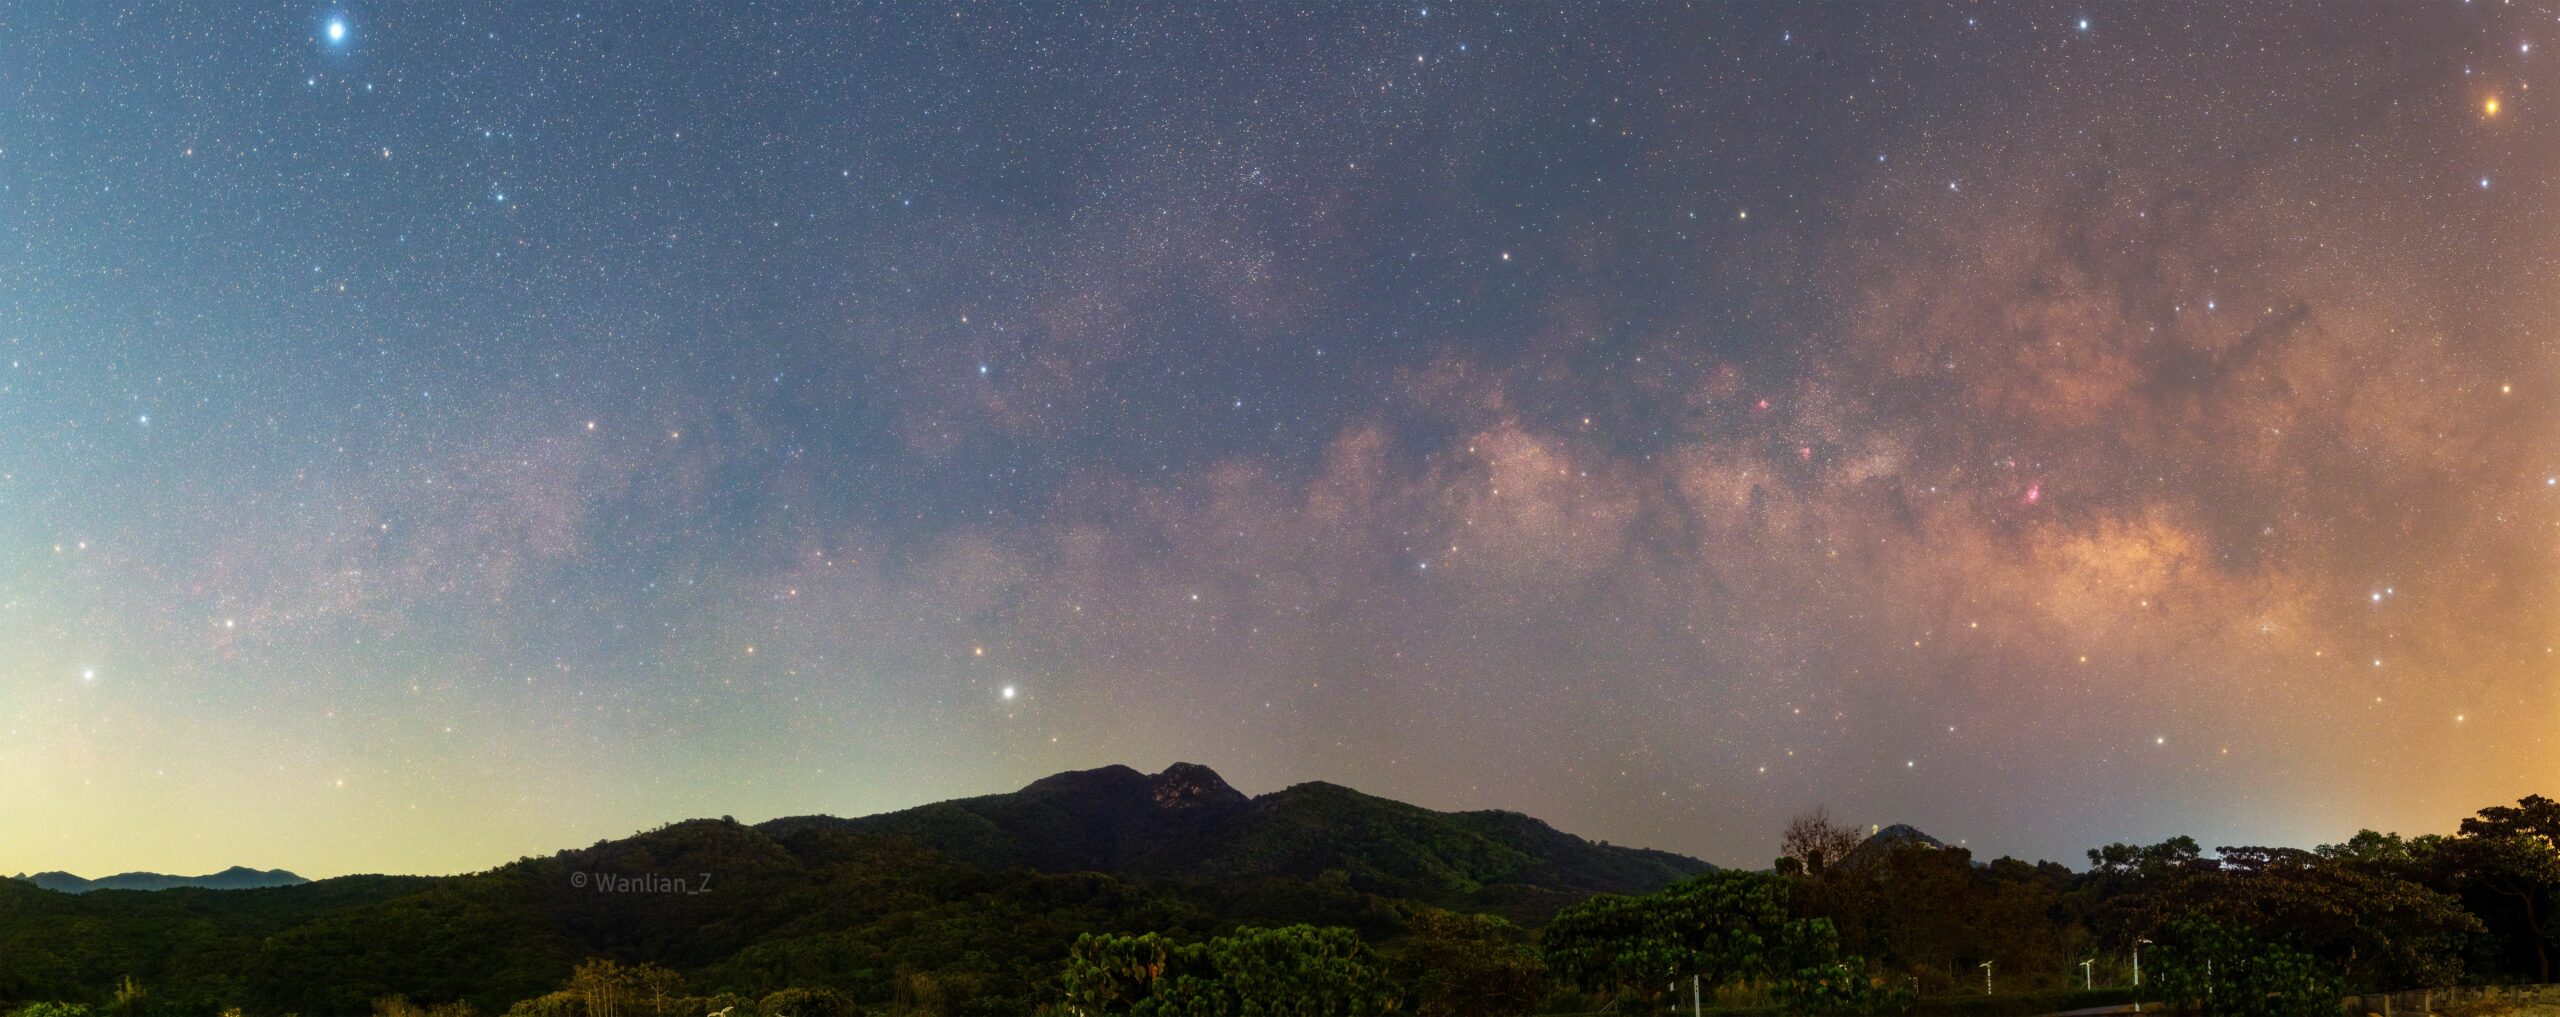 Community of Xichong recognized as first International Dark Sky Community in China Thumbnail